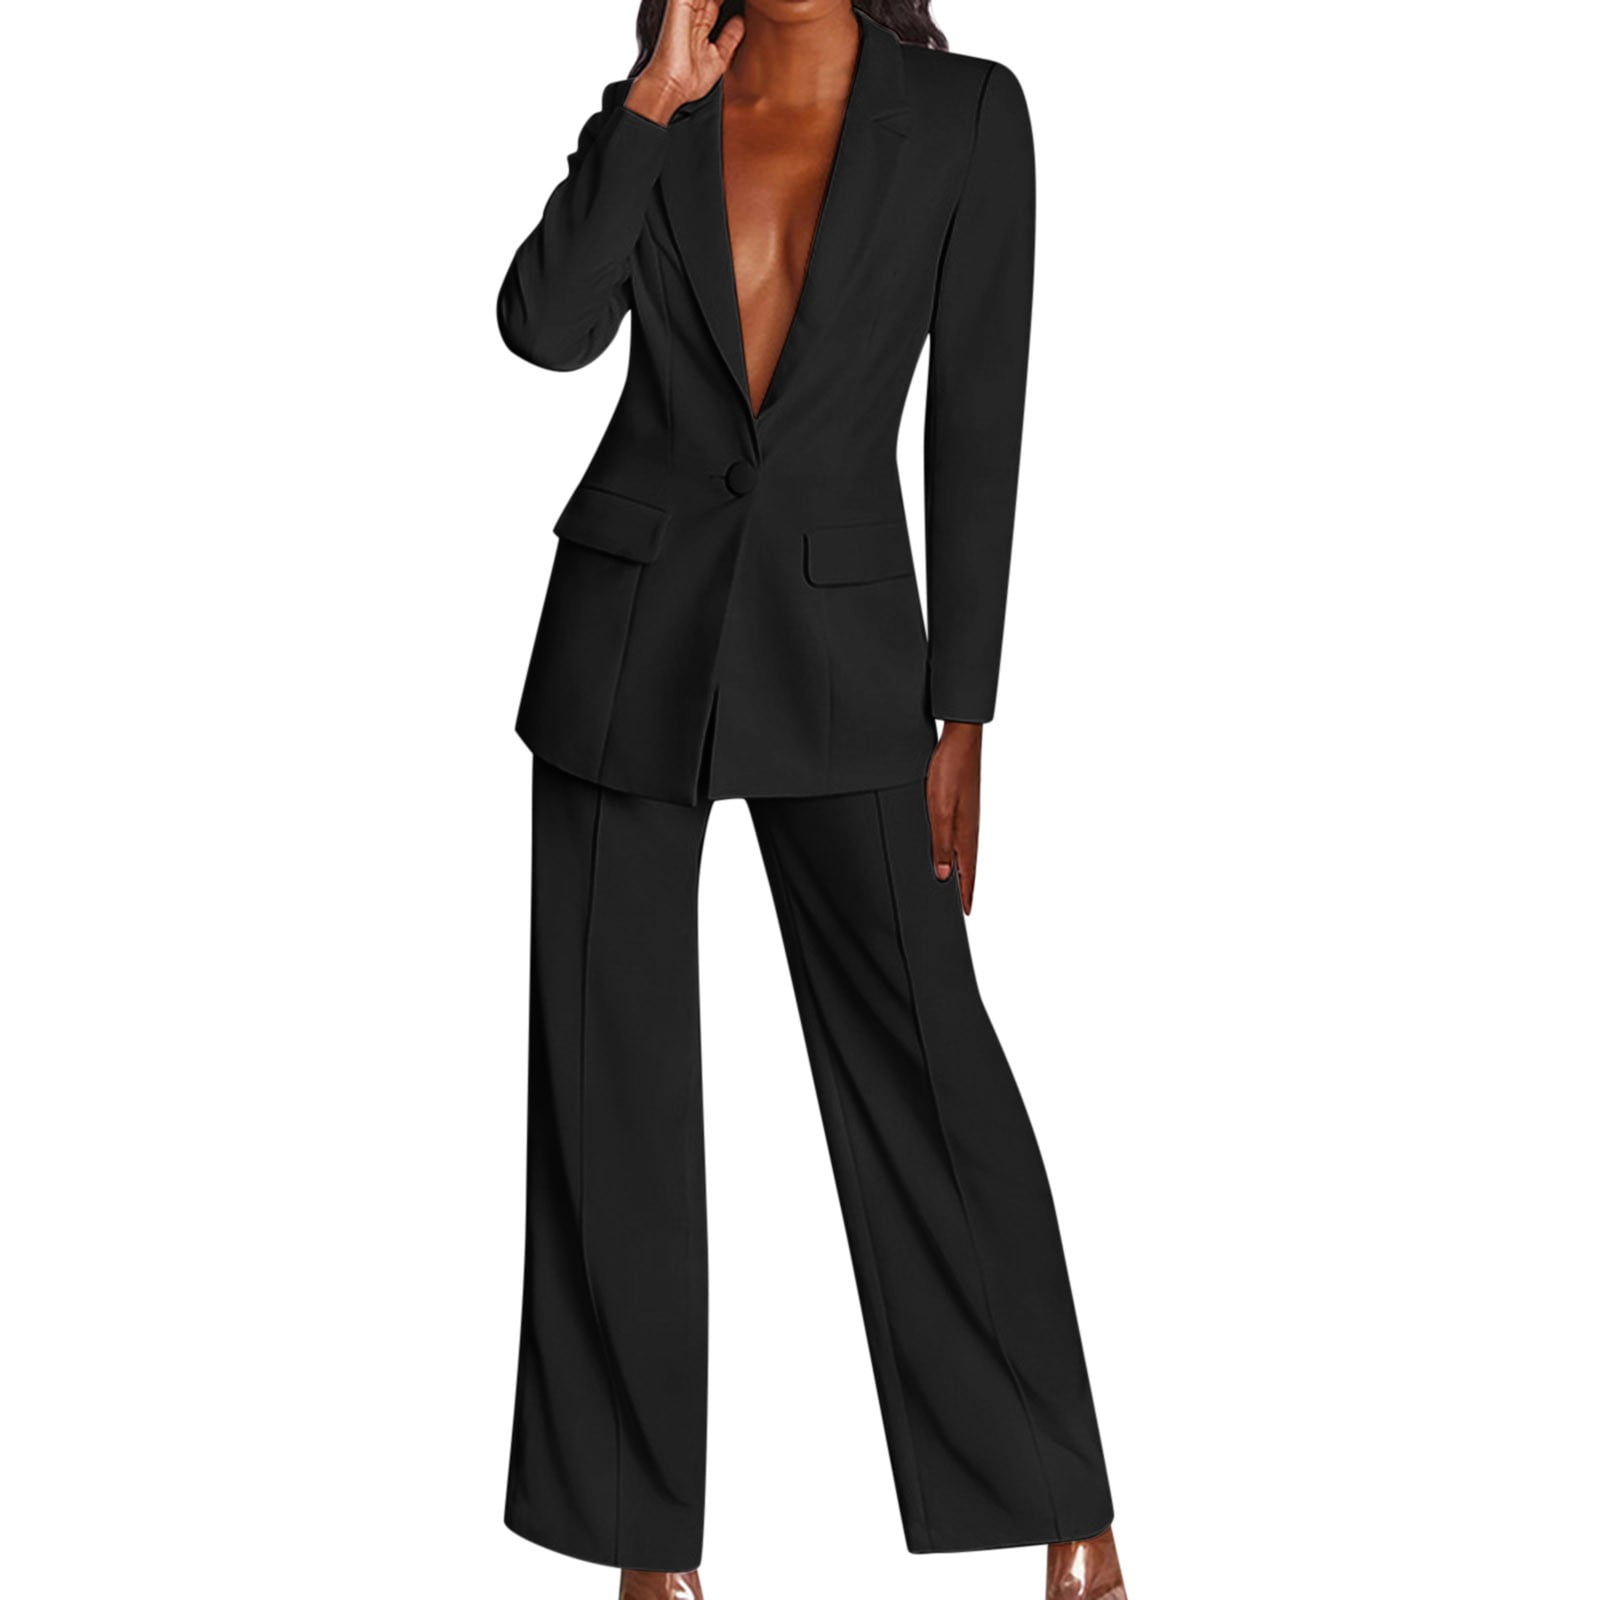 ZIZOCWA Sets for Women Petite Pant Suits for Women Women'S Casual Solid ...